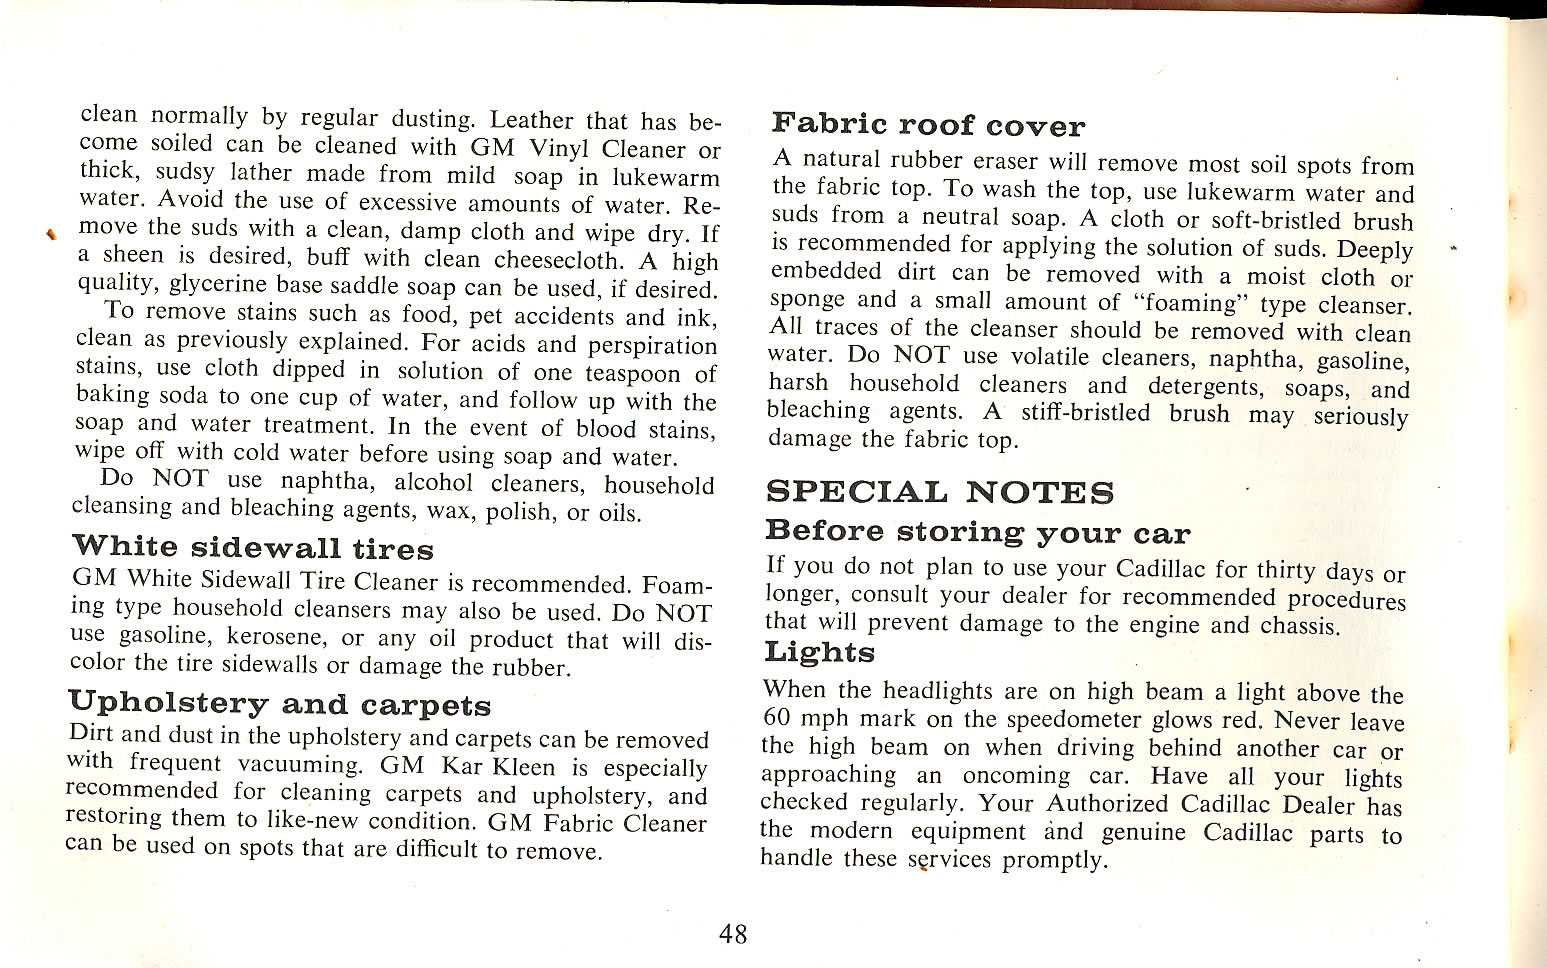 1965 Cadillac Owners Manual Page 16